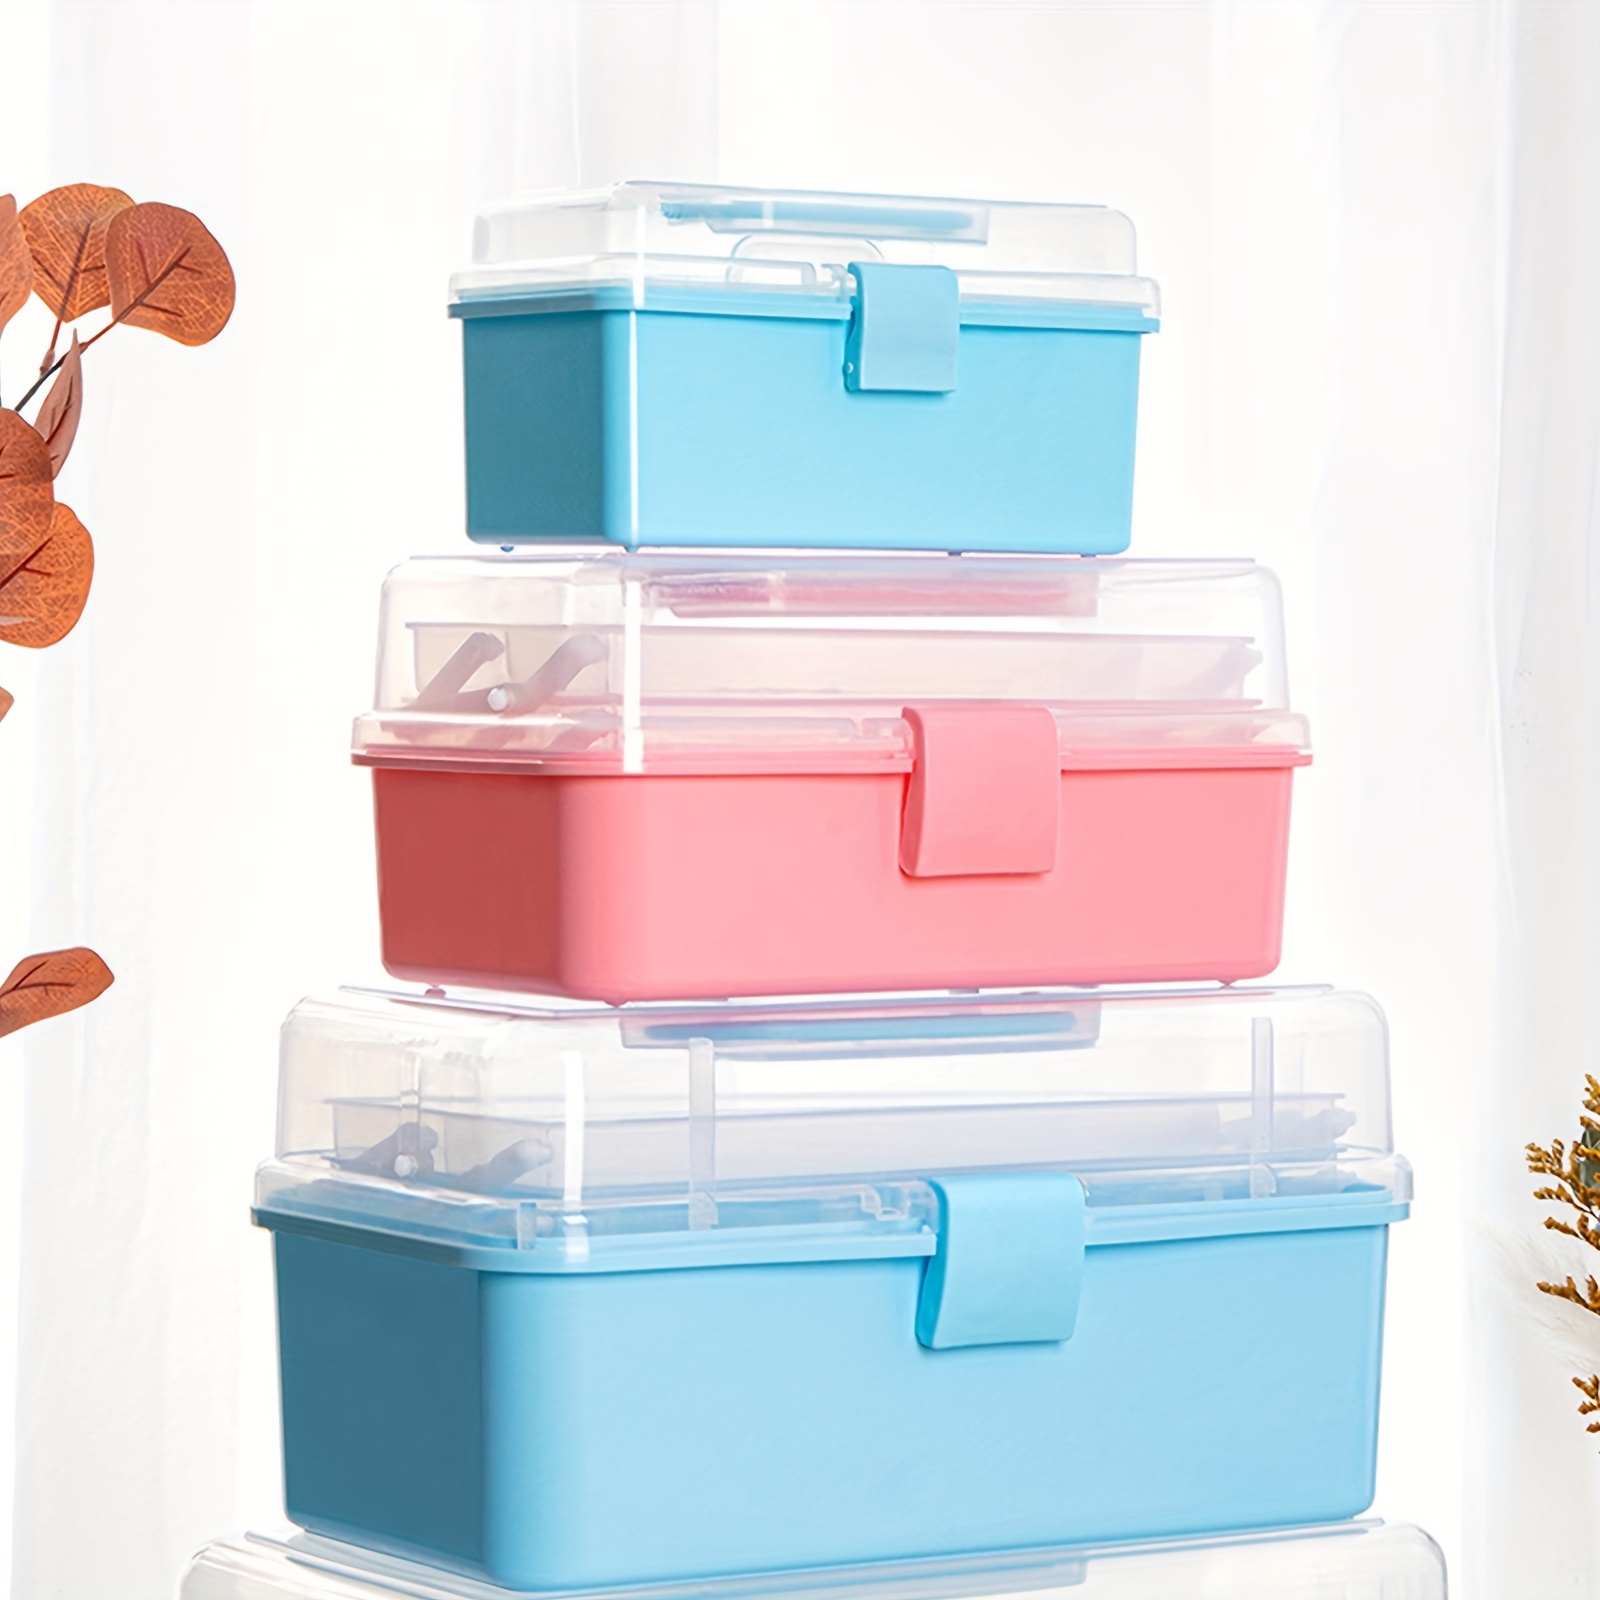 Craft Storage Organizer,Casewin Sewing Box,3-Tier Plastic Organizer Box  with Dividers, Storage Containers for Organizing Art Supplies, Fuse  Beads,Washi Tape, Jewelry,Tool,Kids Toy,Pink 